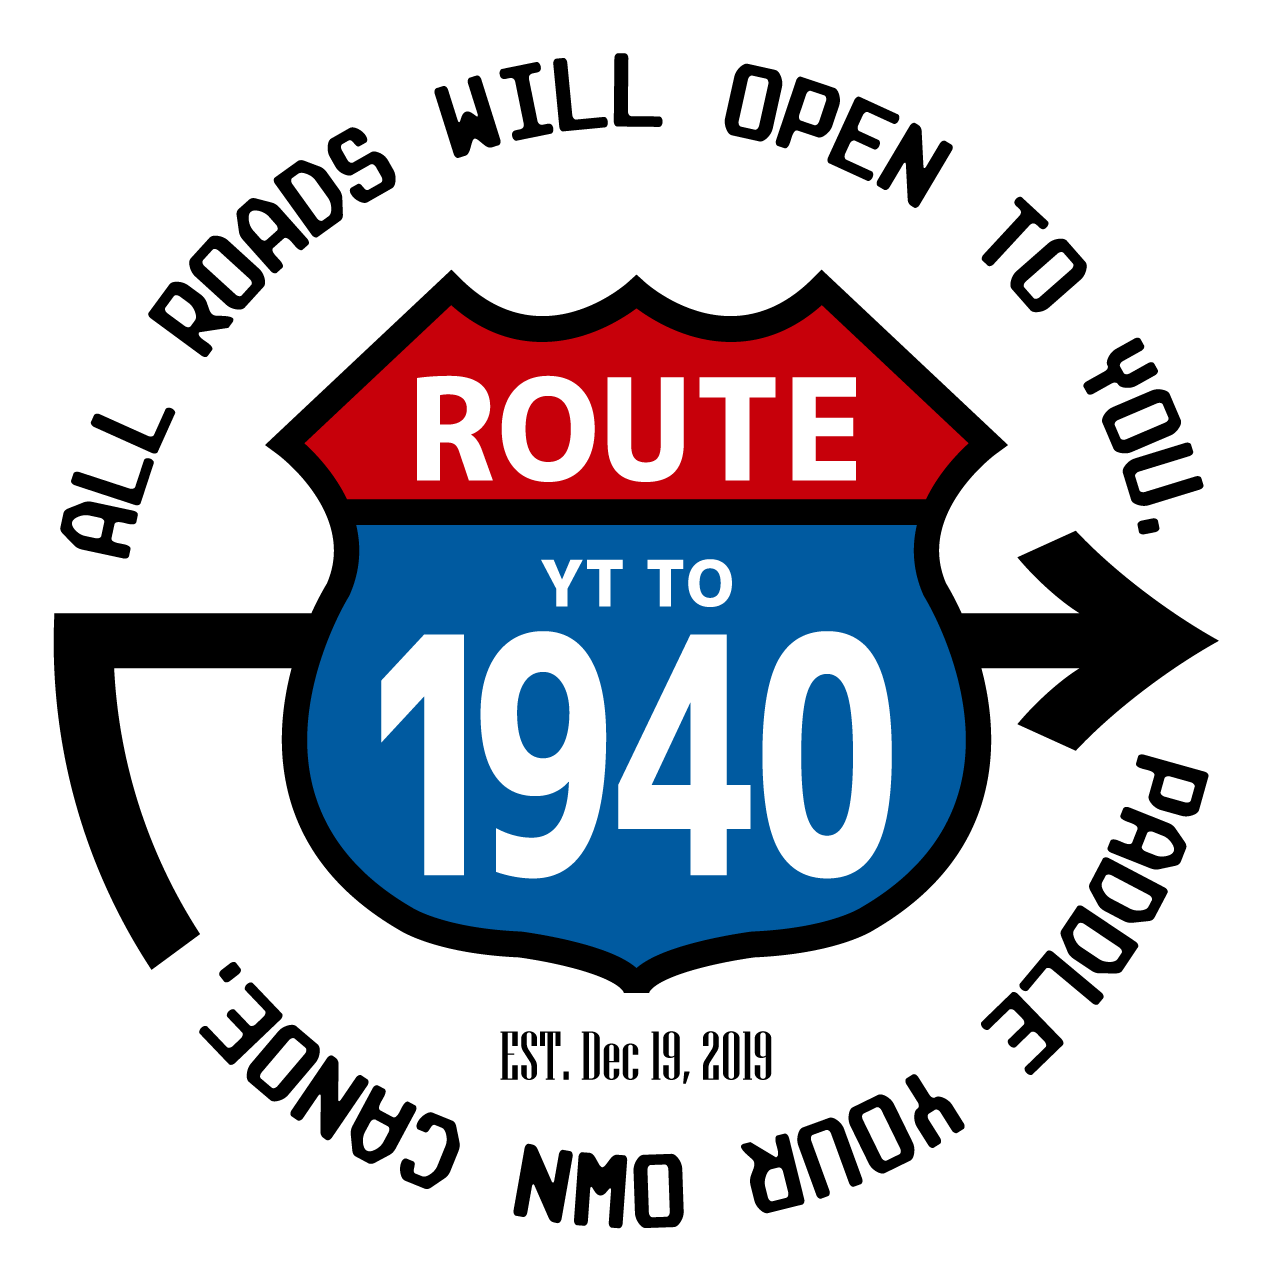 ROUTE 1940